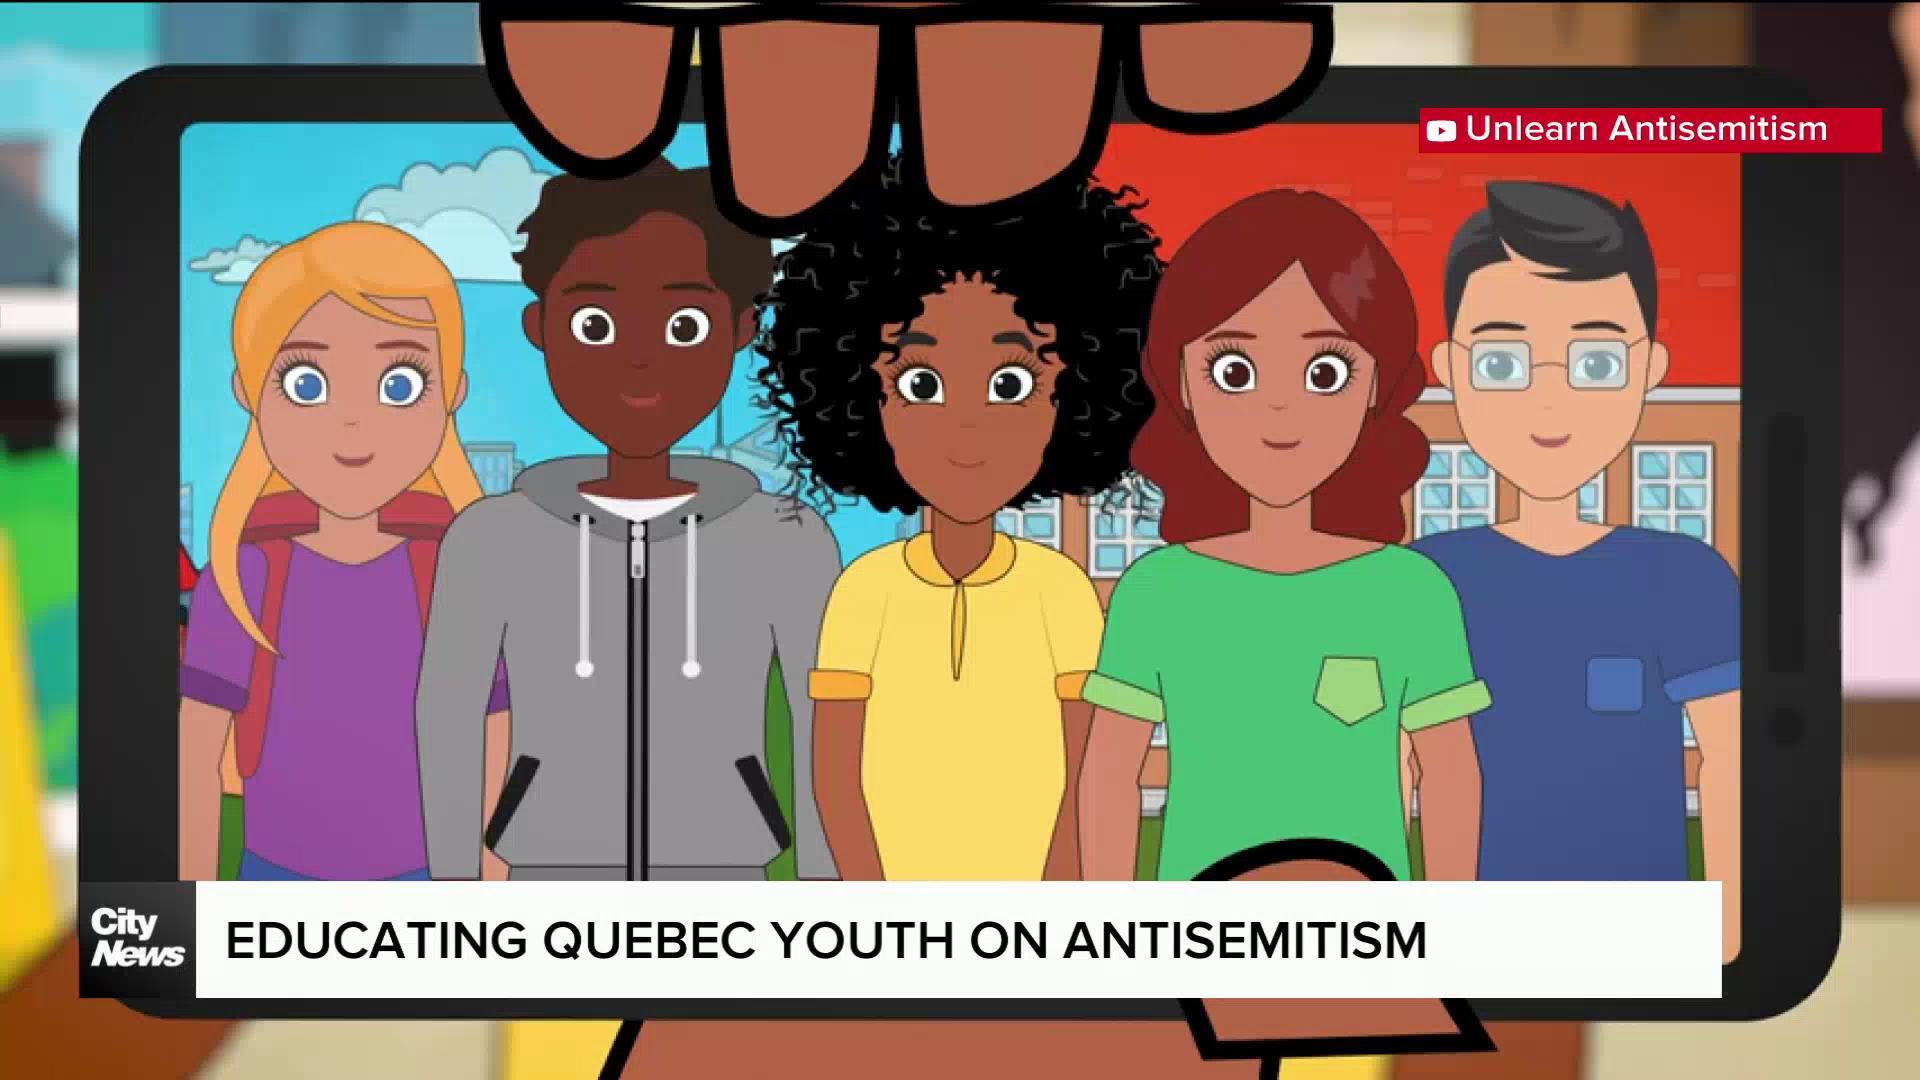 New platform launched in Quebec to educate youth on antisemitism